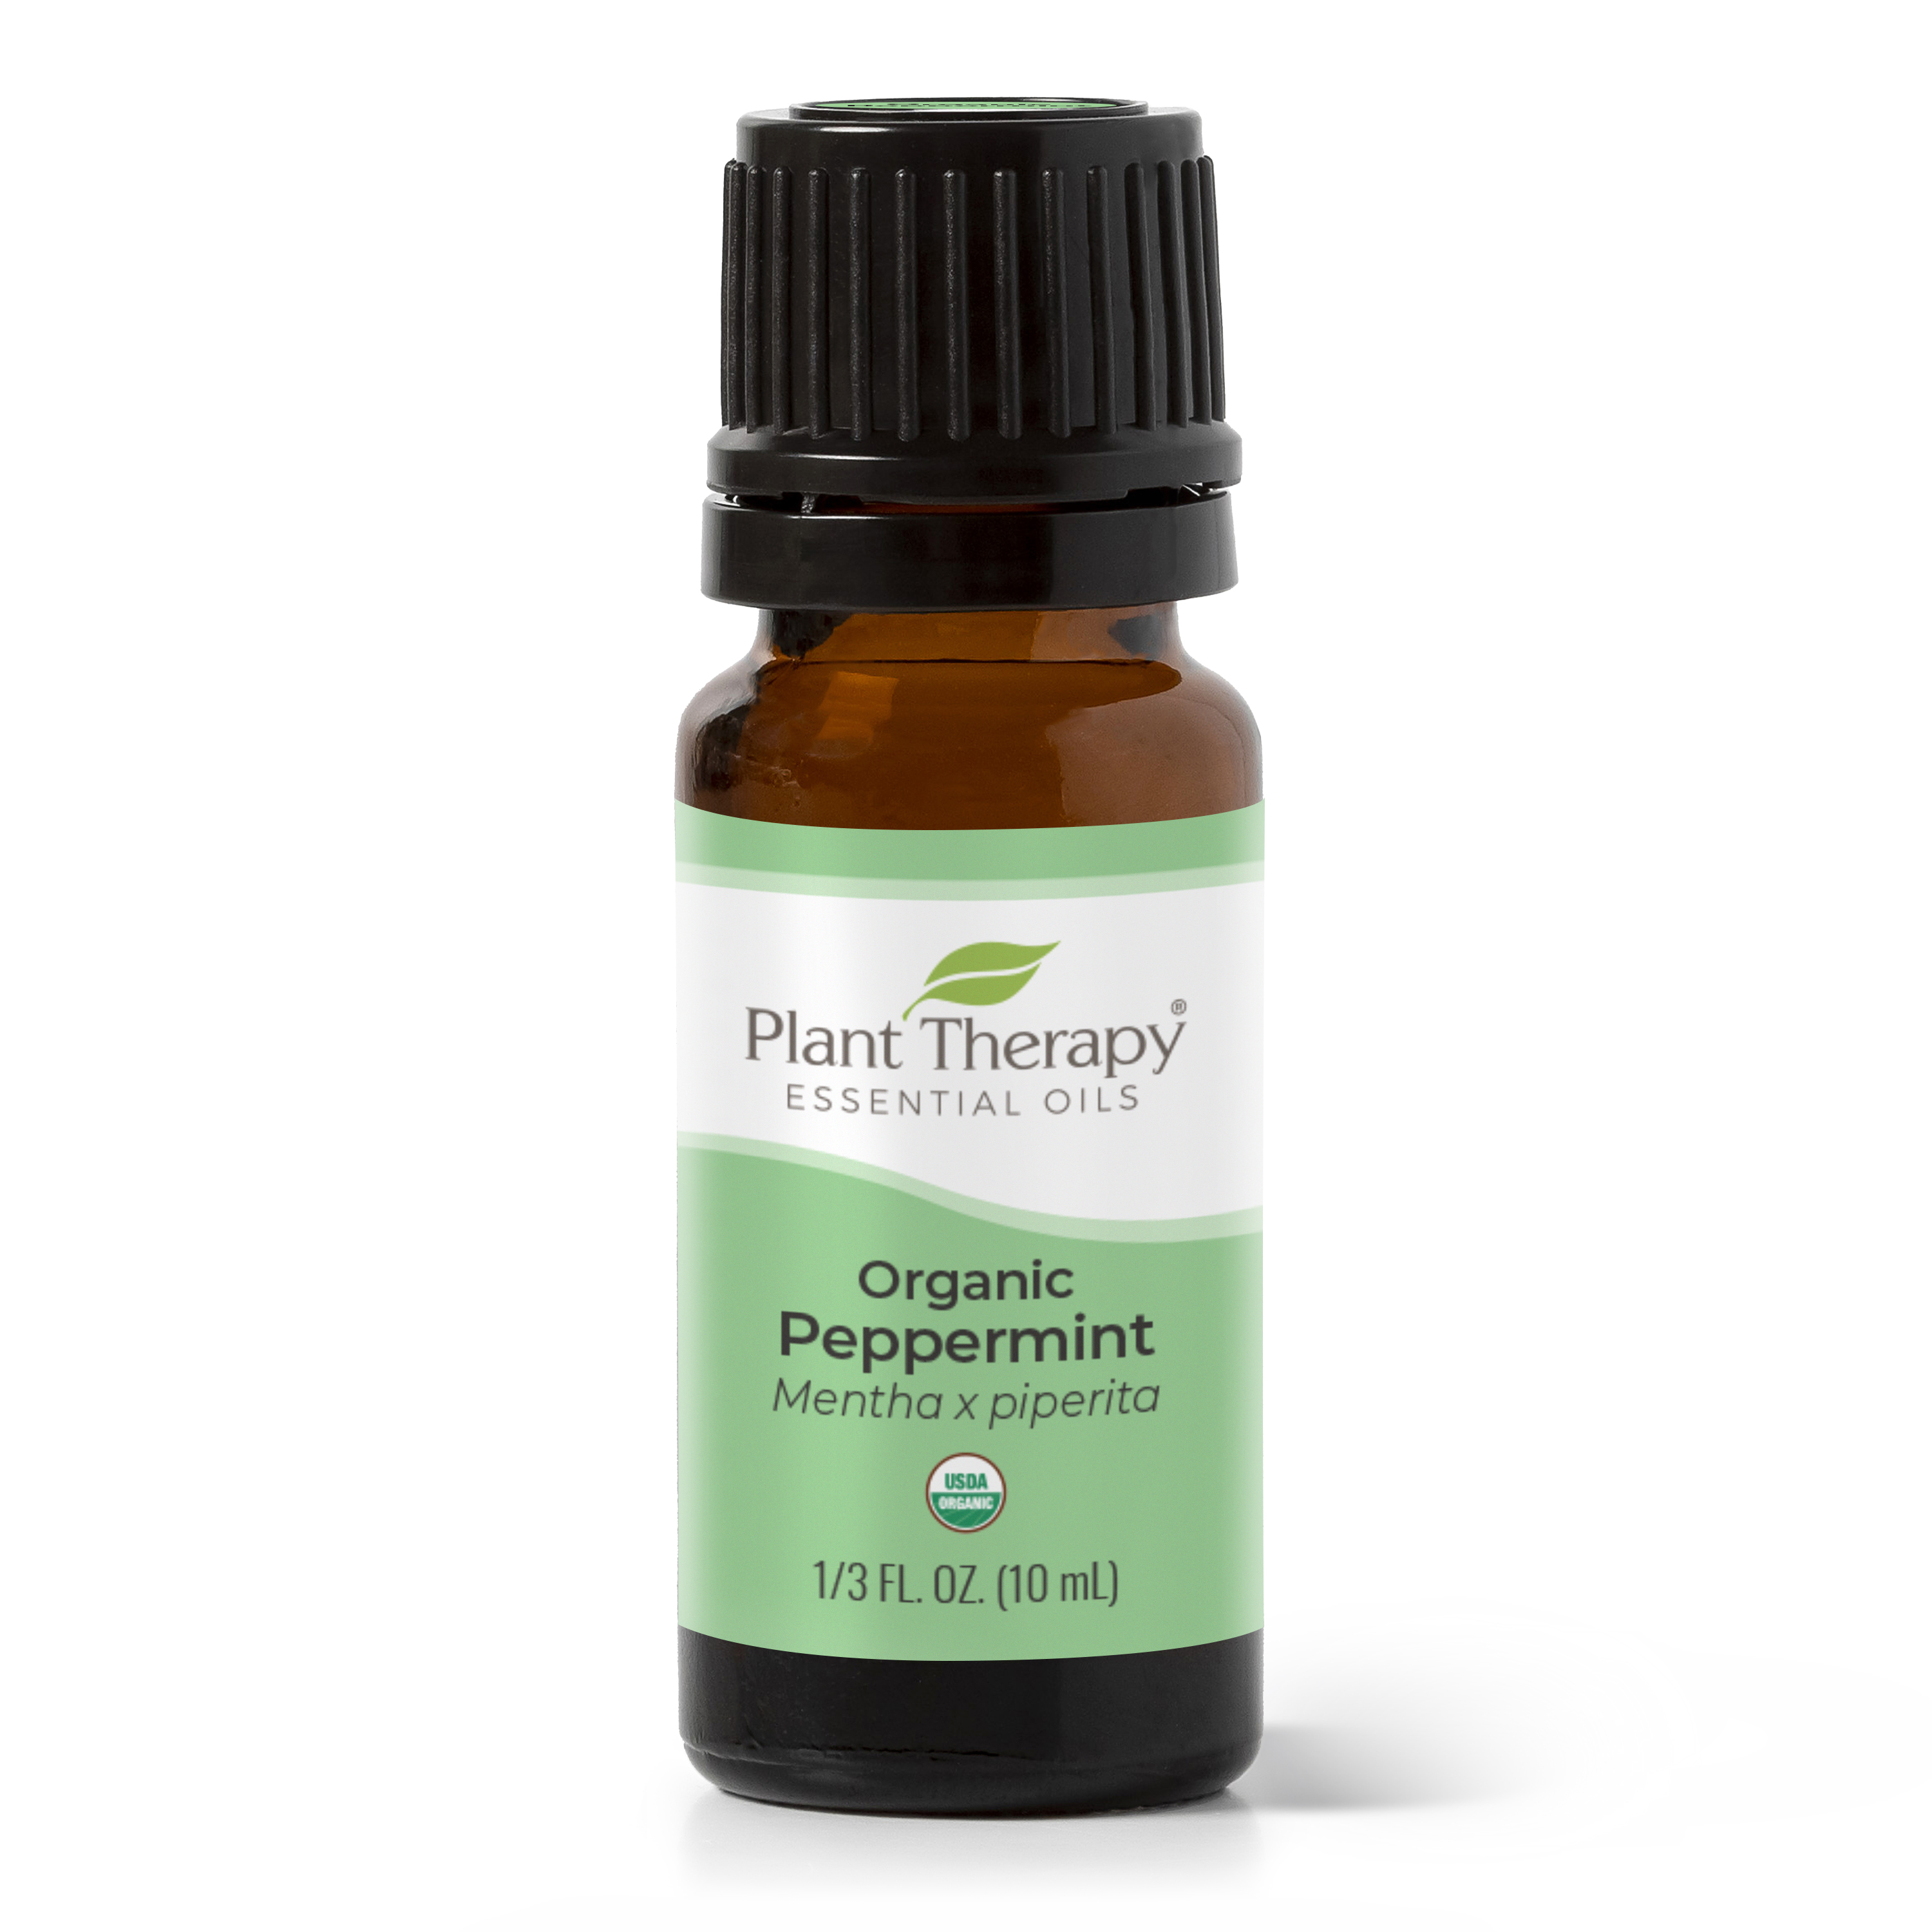 Plant Therapy USDA Organic Peppermint Essential 10 ml (1/3 oz) Oil 100% Pure, Undiluted for Energy & Pain - image 1 of 7